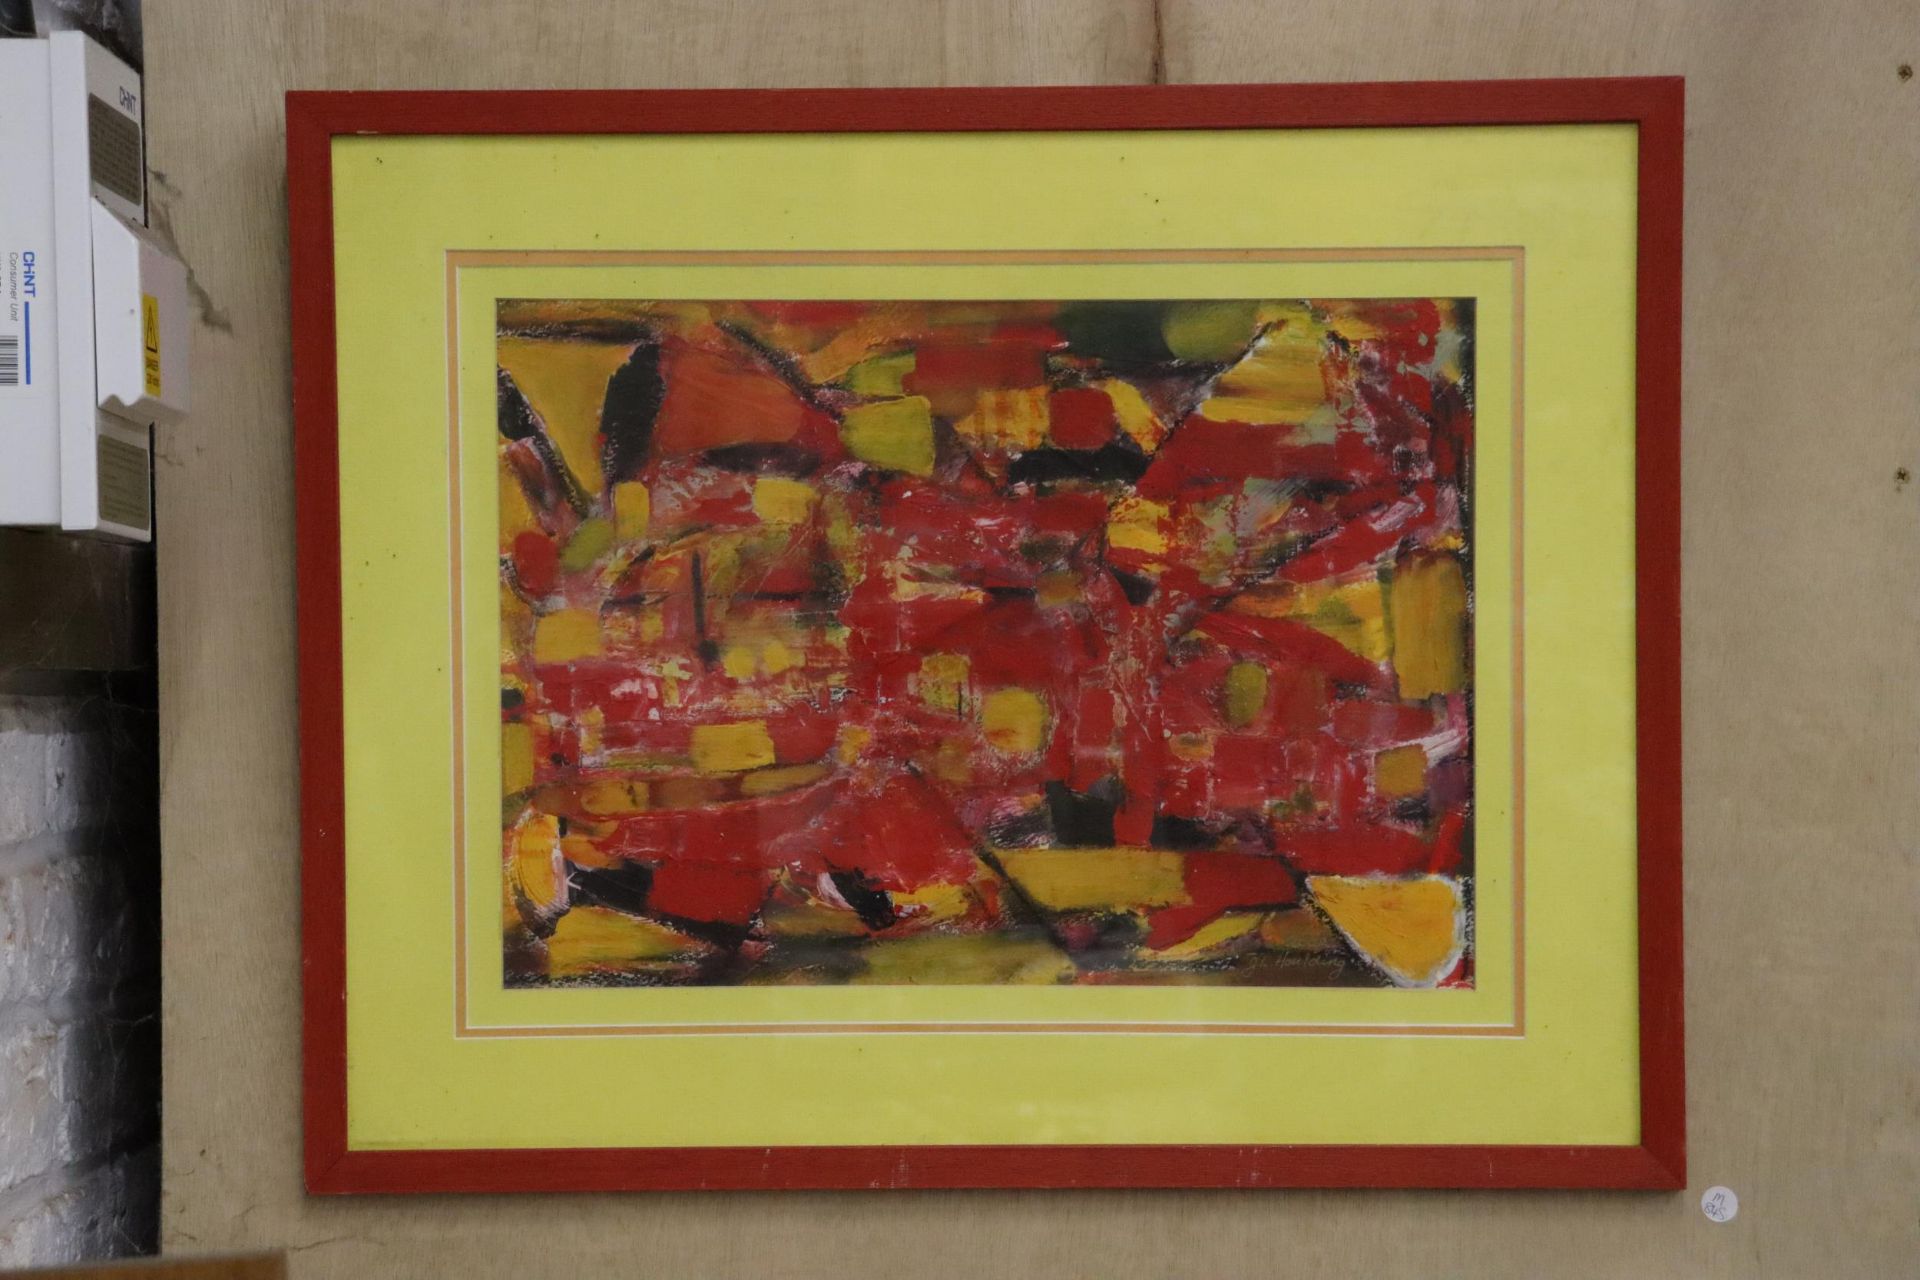 AN ABSTRACT OIL PAINTING SIGNED J L HOULDING 2002, 74CM X 59CM